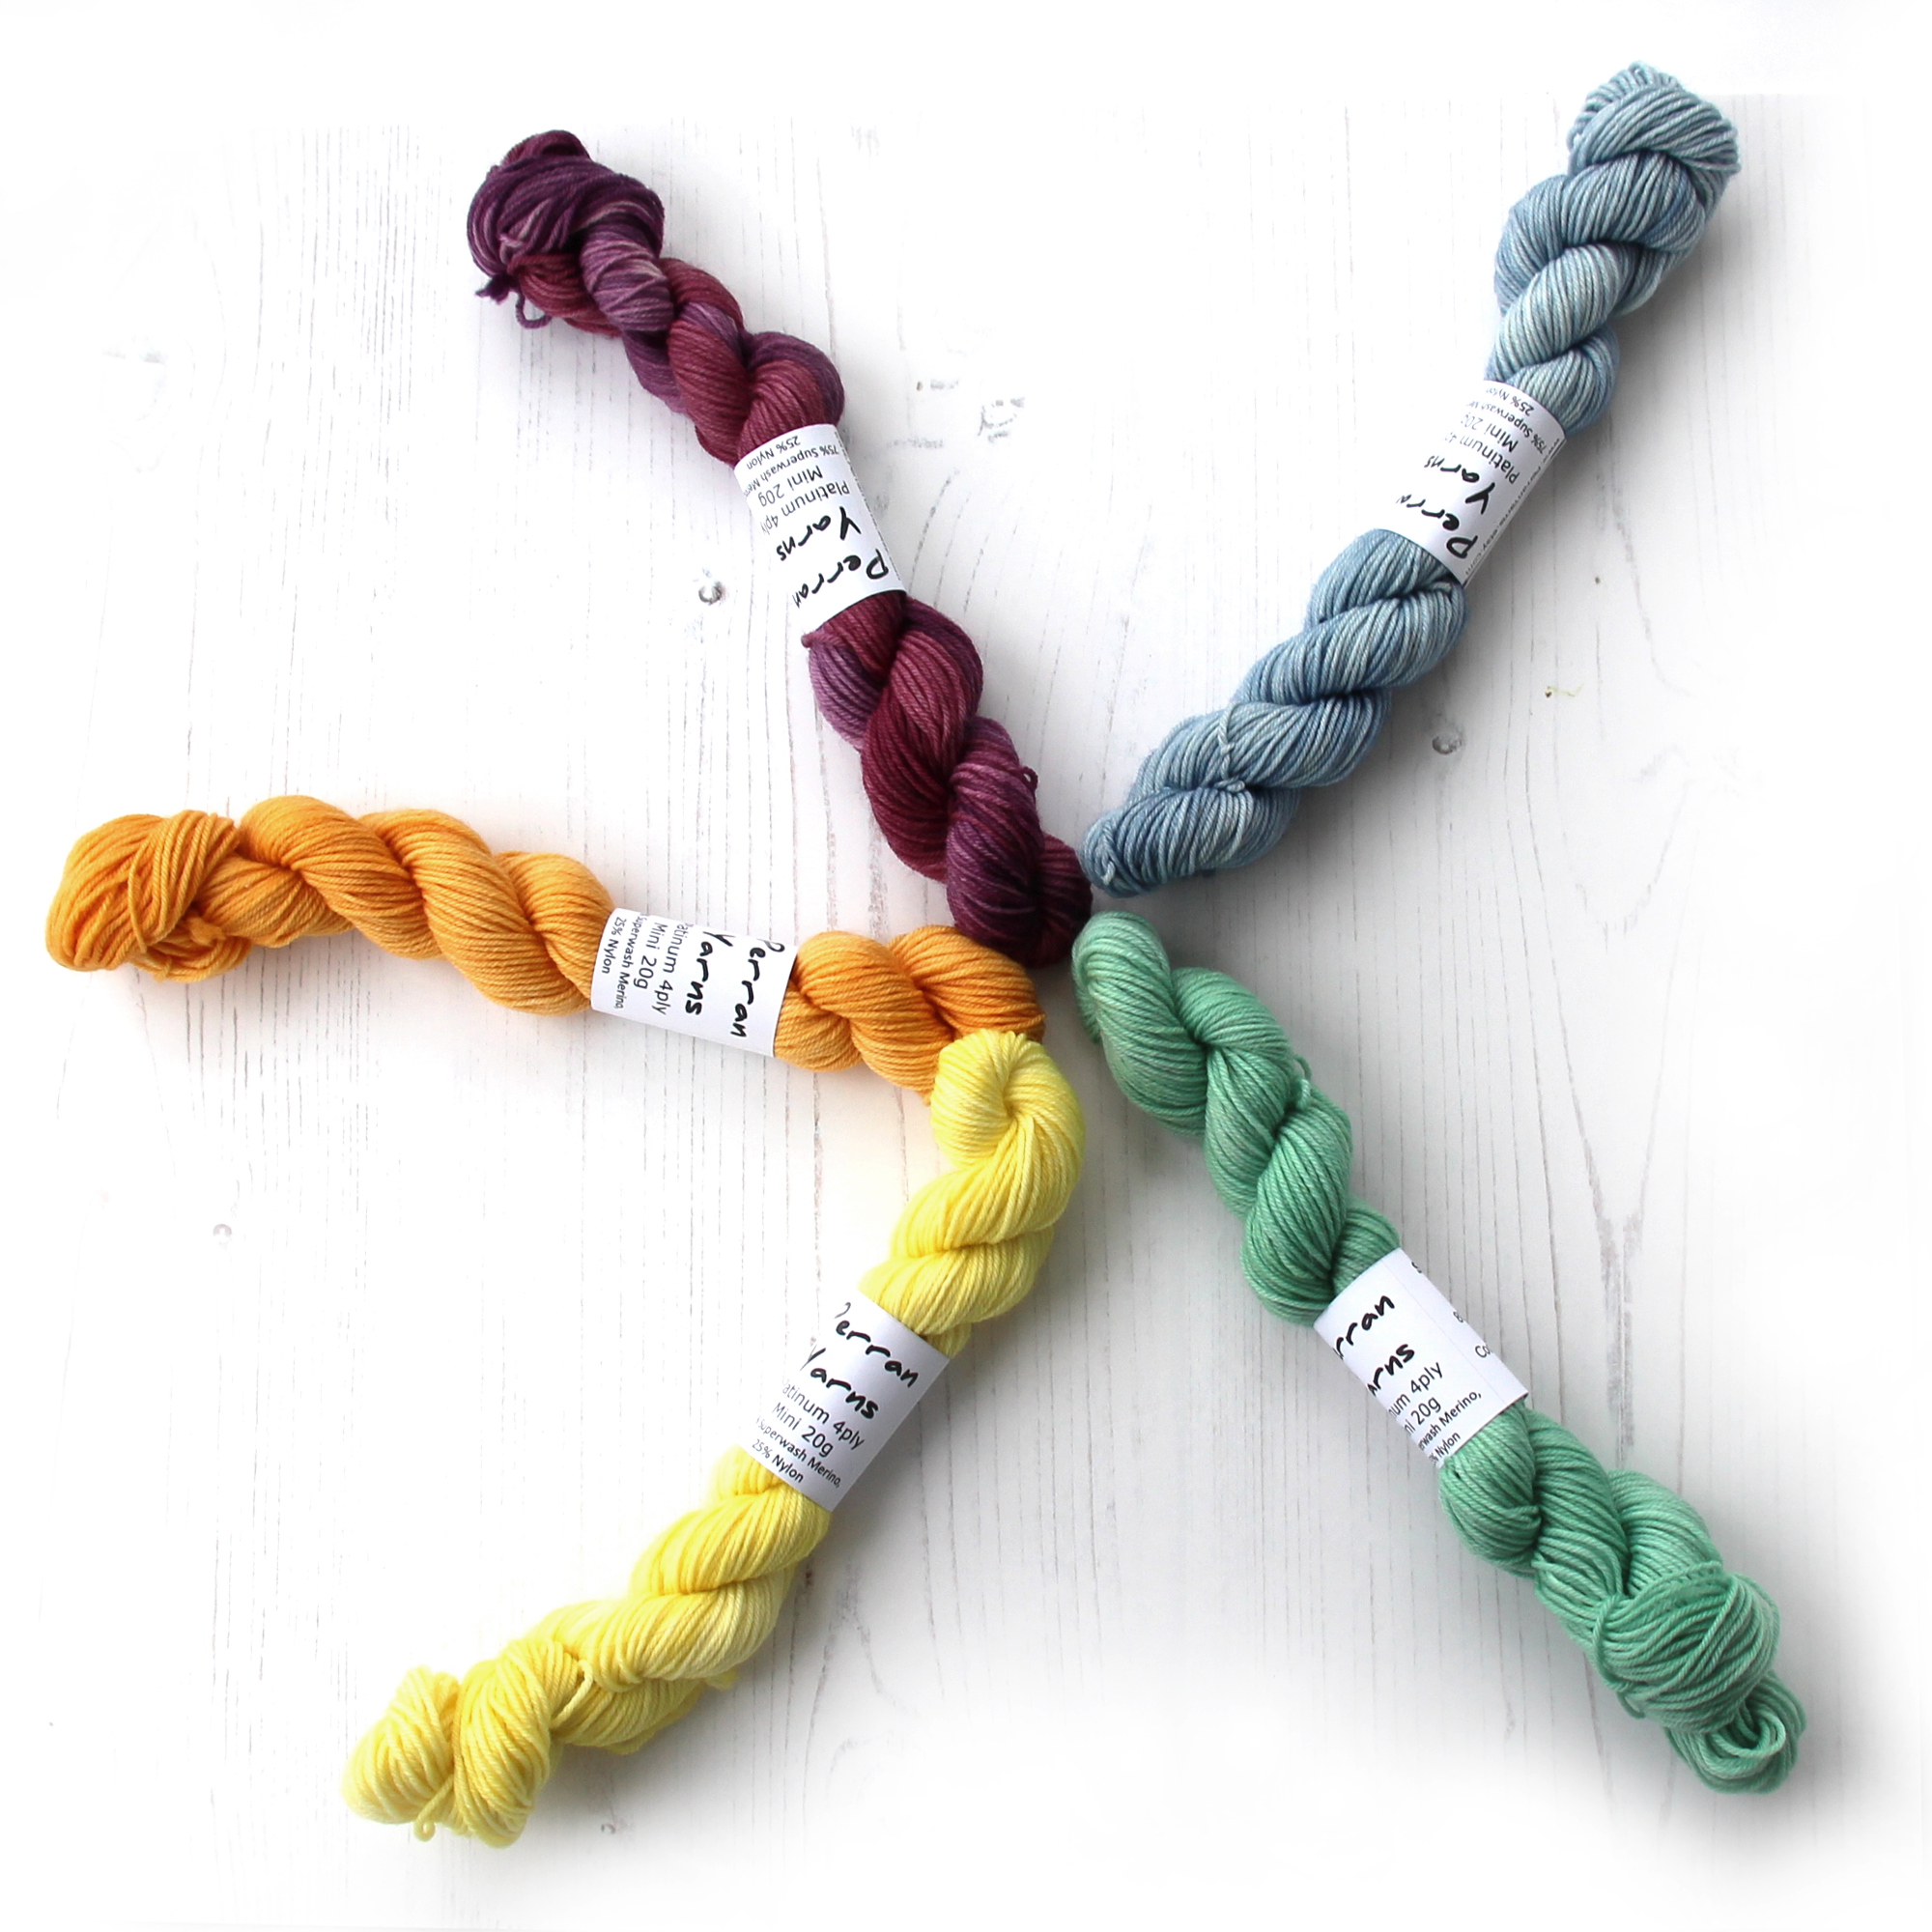 2020 Yarn Advent pre order now available Perran Yarns